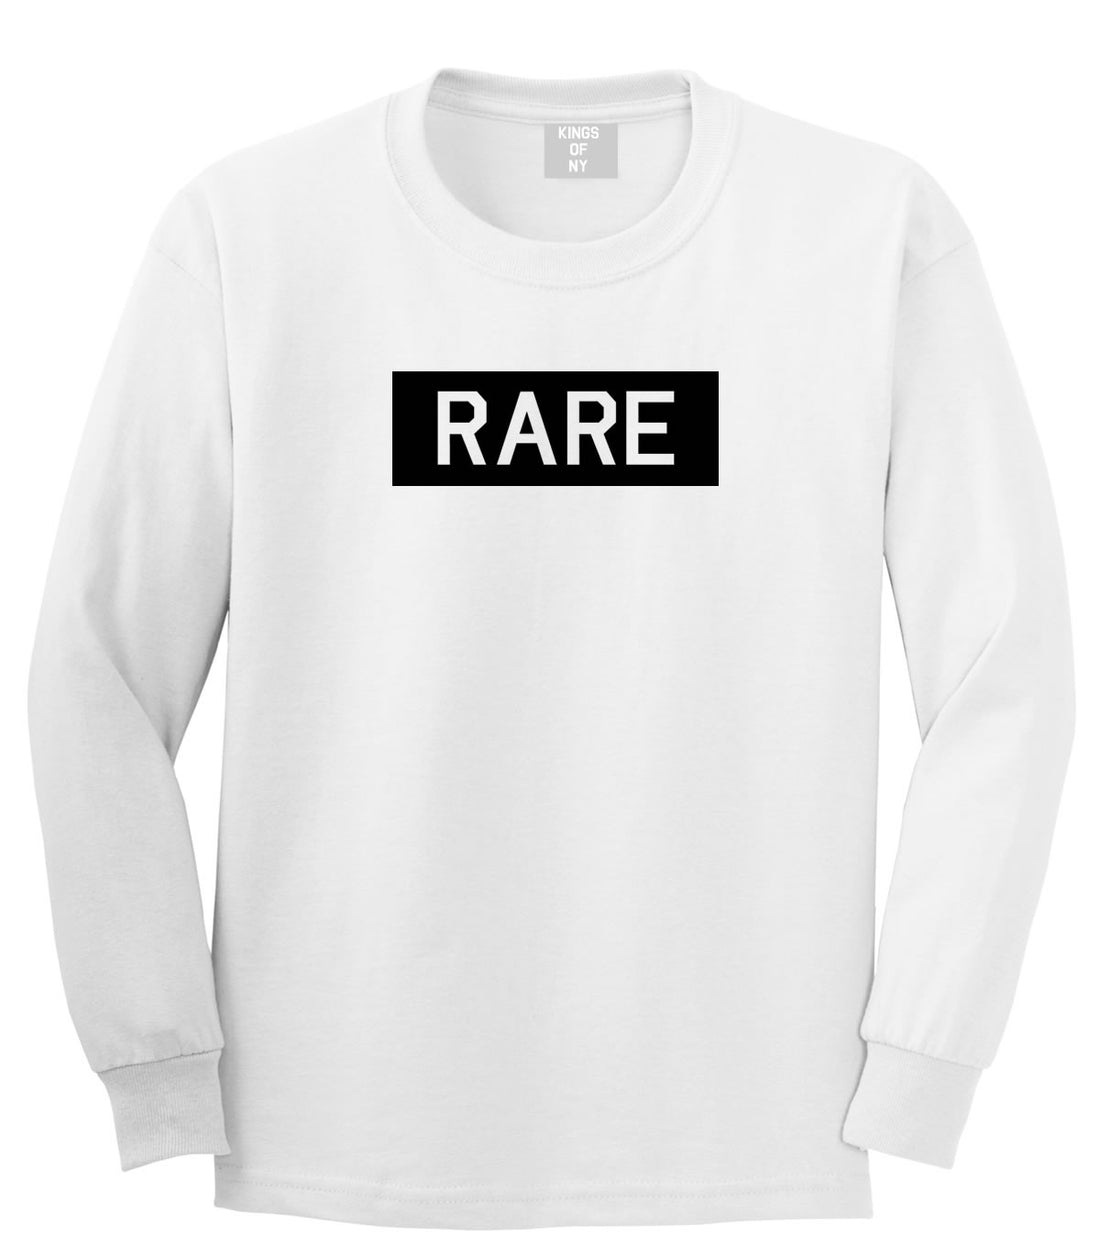 Rare College Block Long Sleeve T-Shirt in White by Kings Of NY